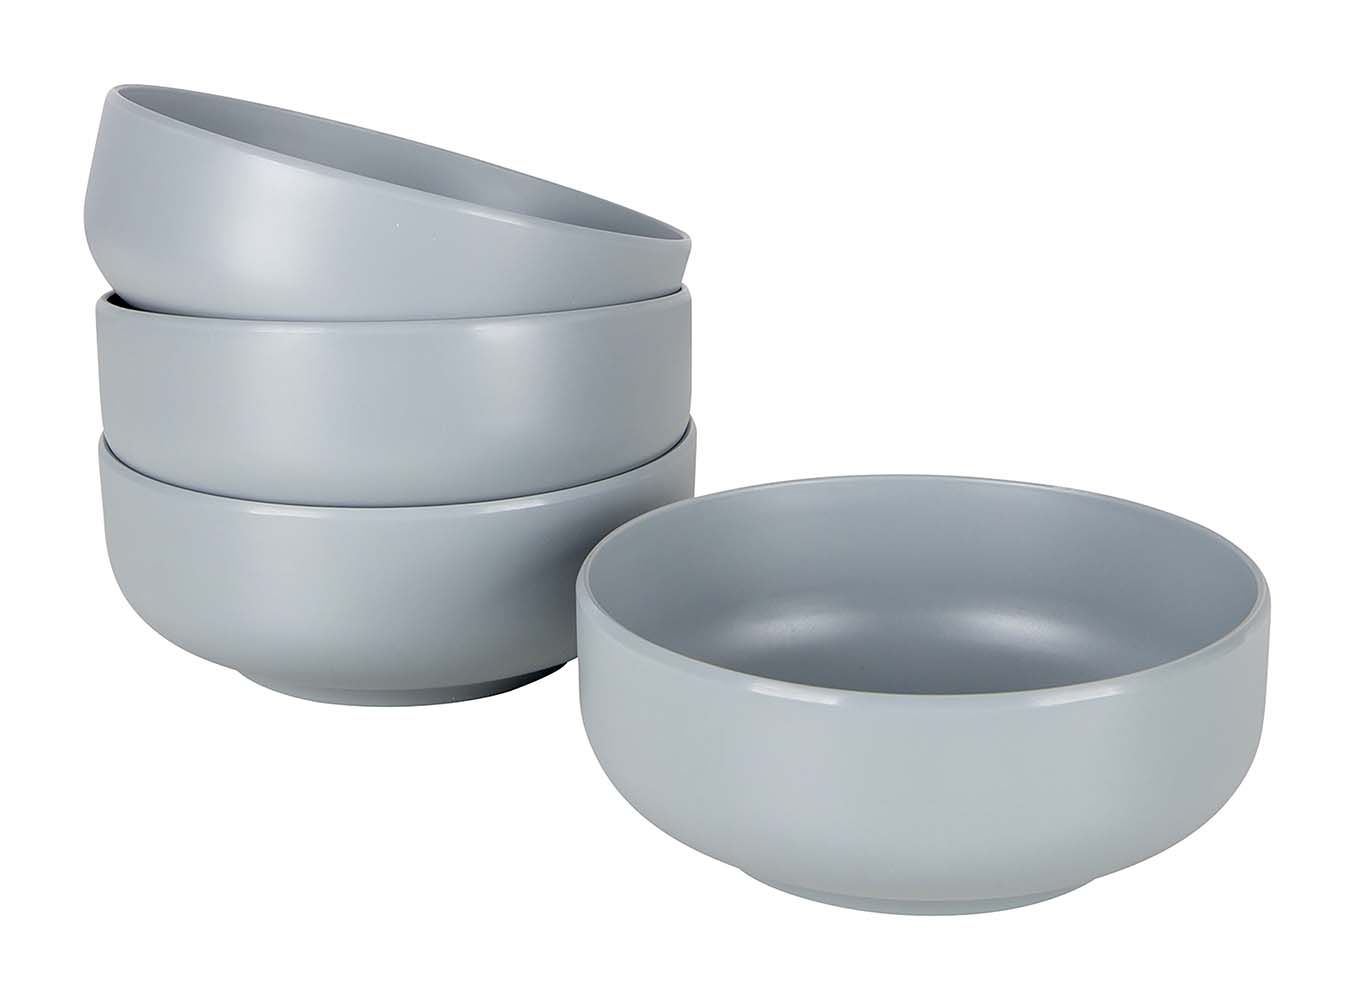 Bo-Camp - Industrial collection - Tableware - Patom - Melamine - 16 Pieces - Light grey detail 4